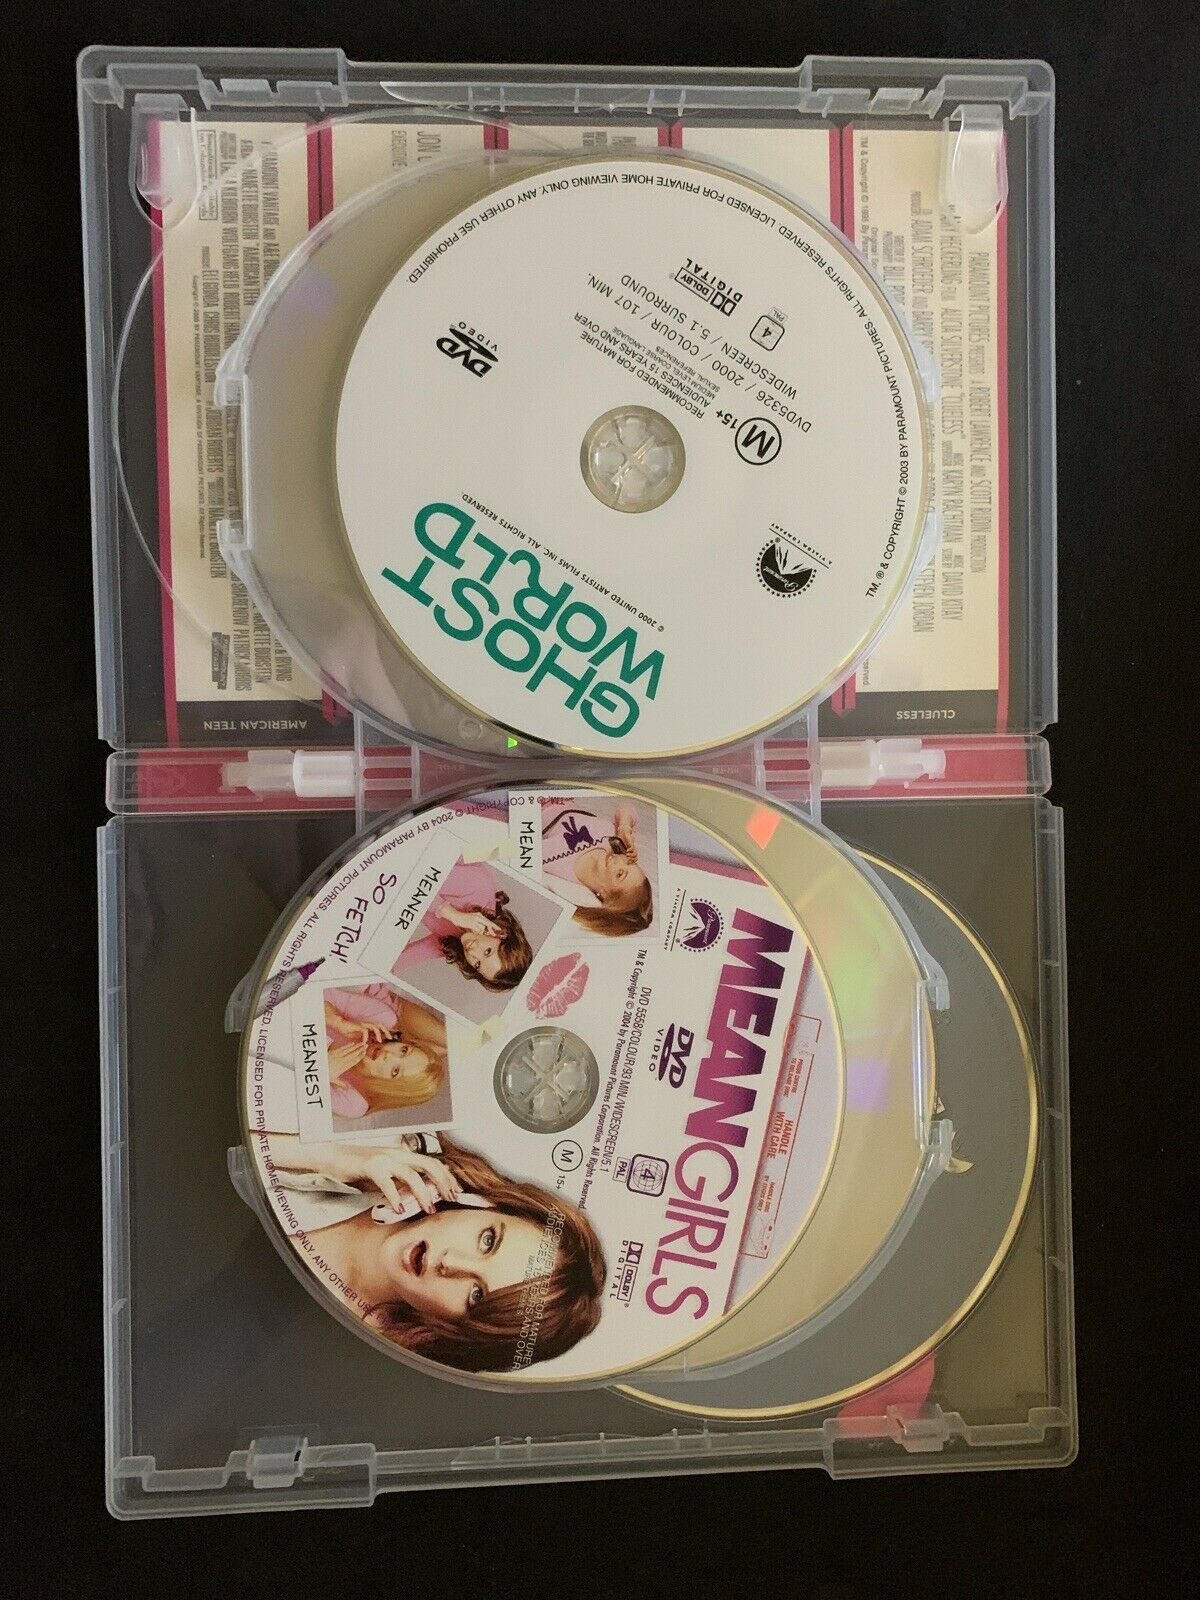 American Teen / Clueless / Ghost World / Mean Girls / Pretty in Pink R4 - DVD